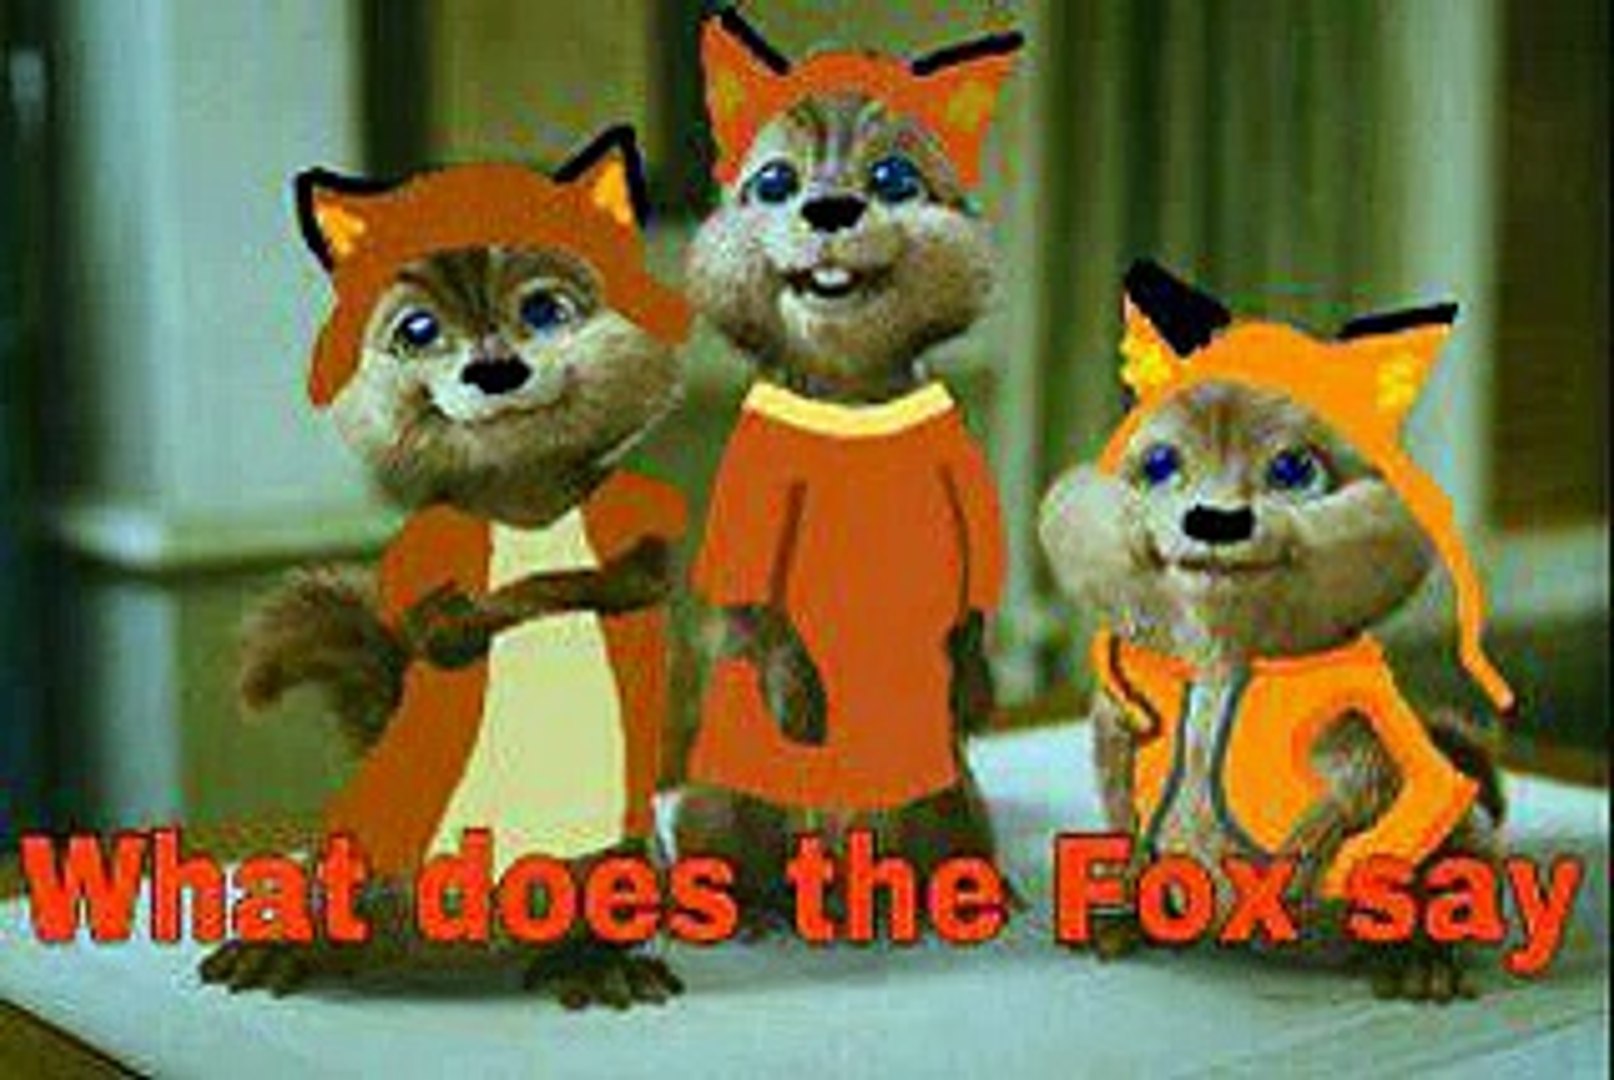 Chipmunks The Fox (What does the fox say)